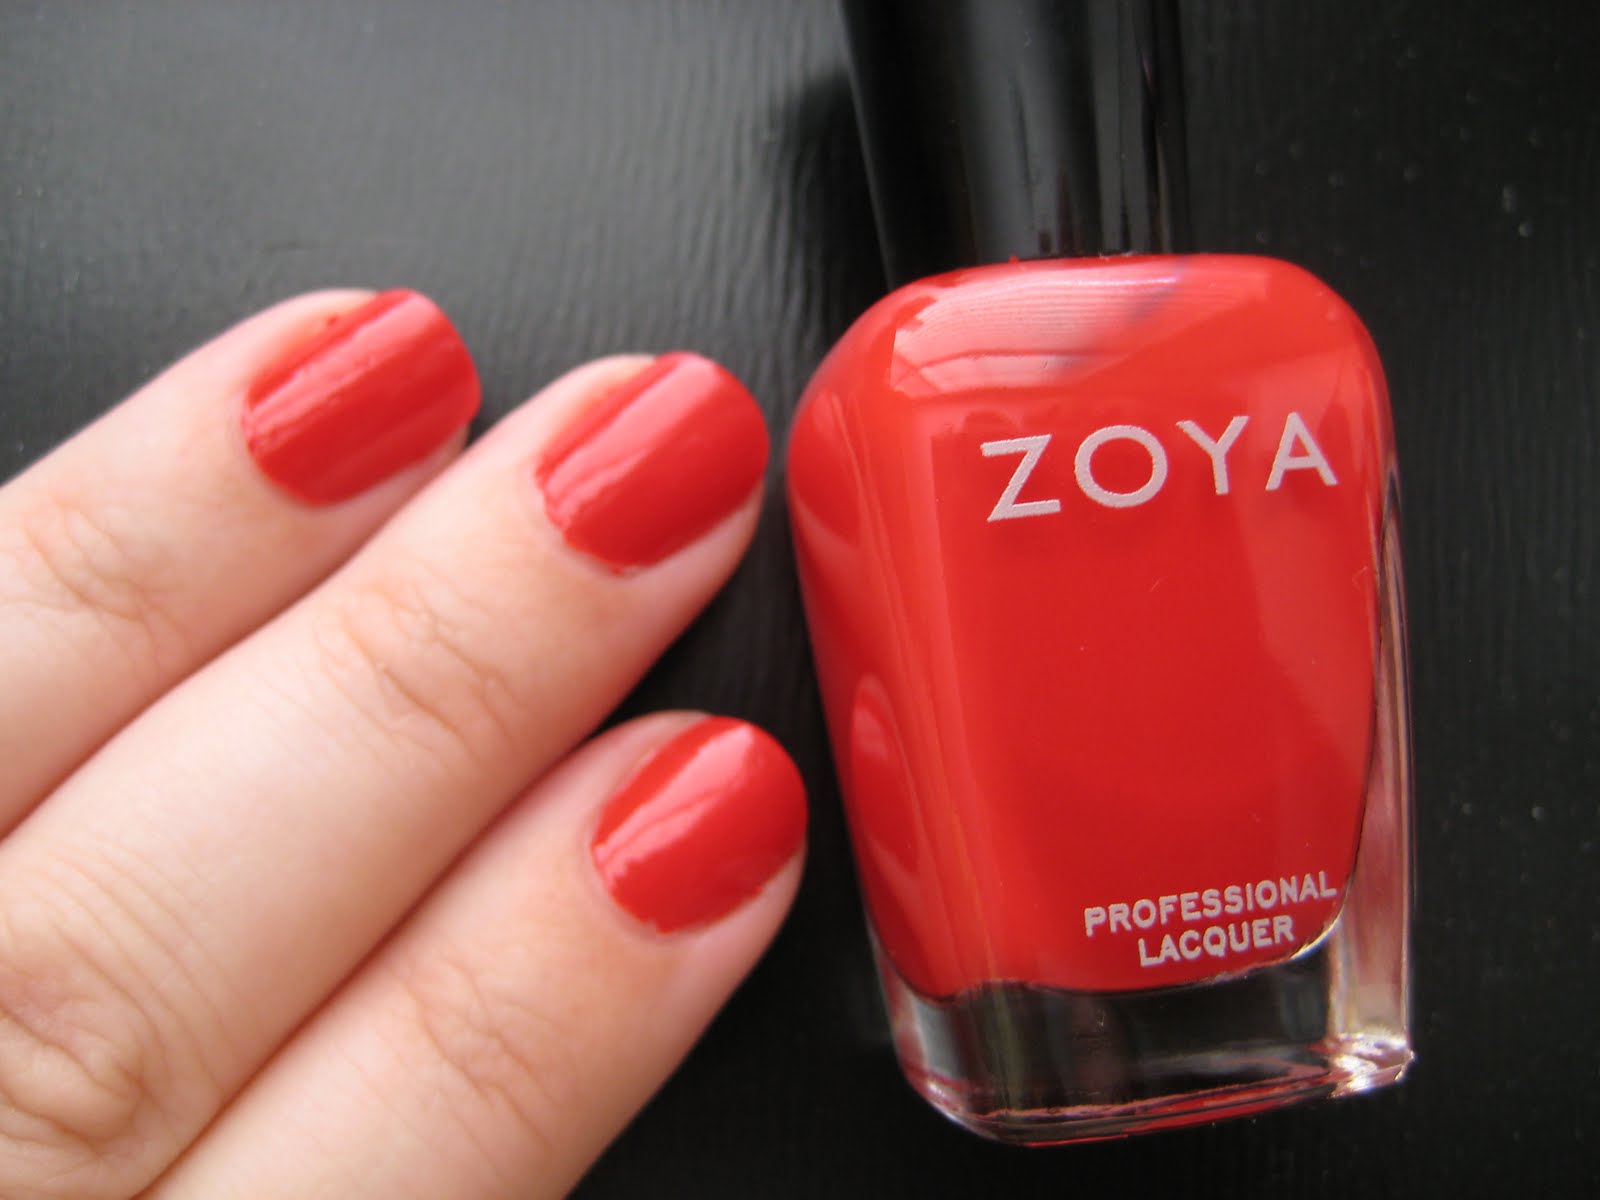 4. Zoya Professional Lacquer - wide 10